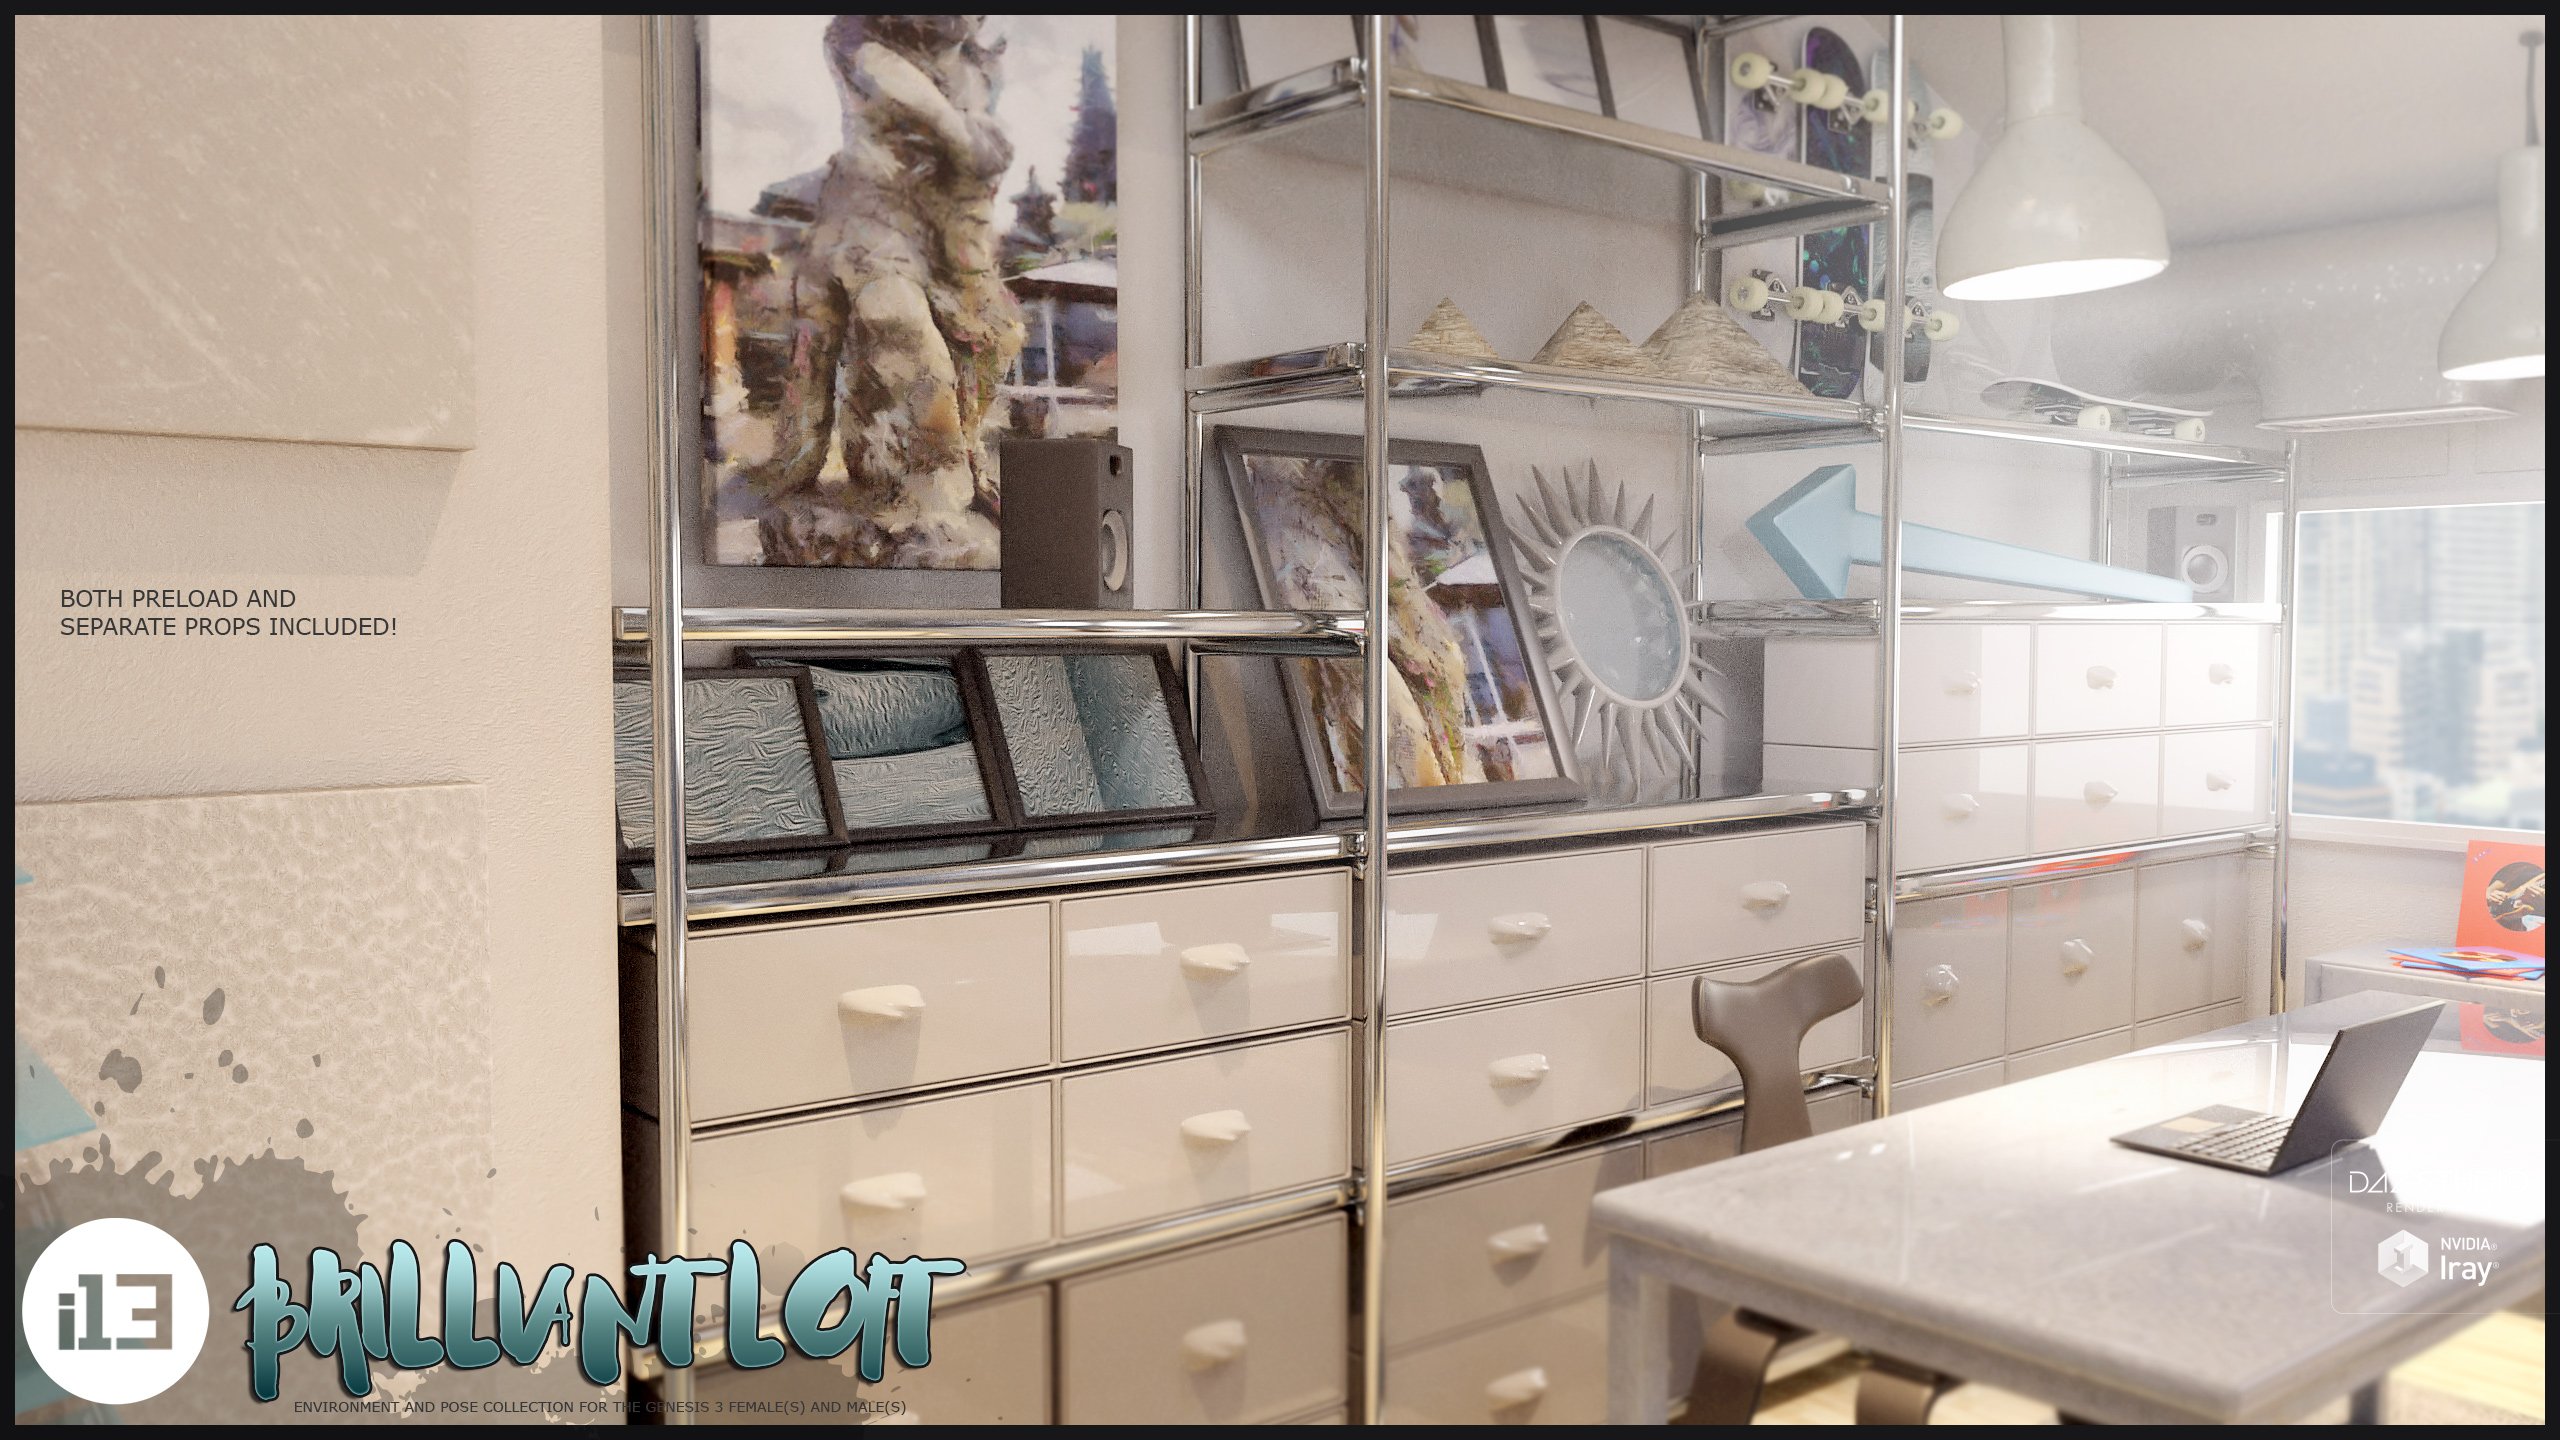 i13 Brilliant Loft Environment and Poses by: ironman13, 3D Models by Daz 3D